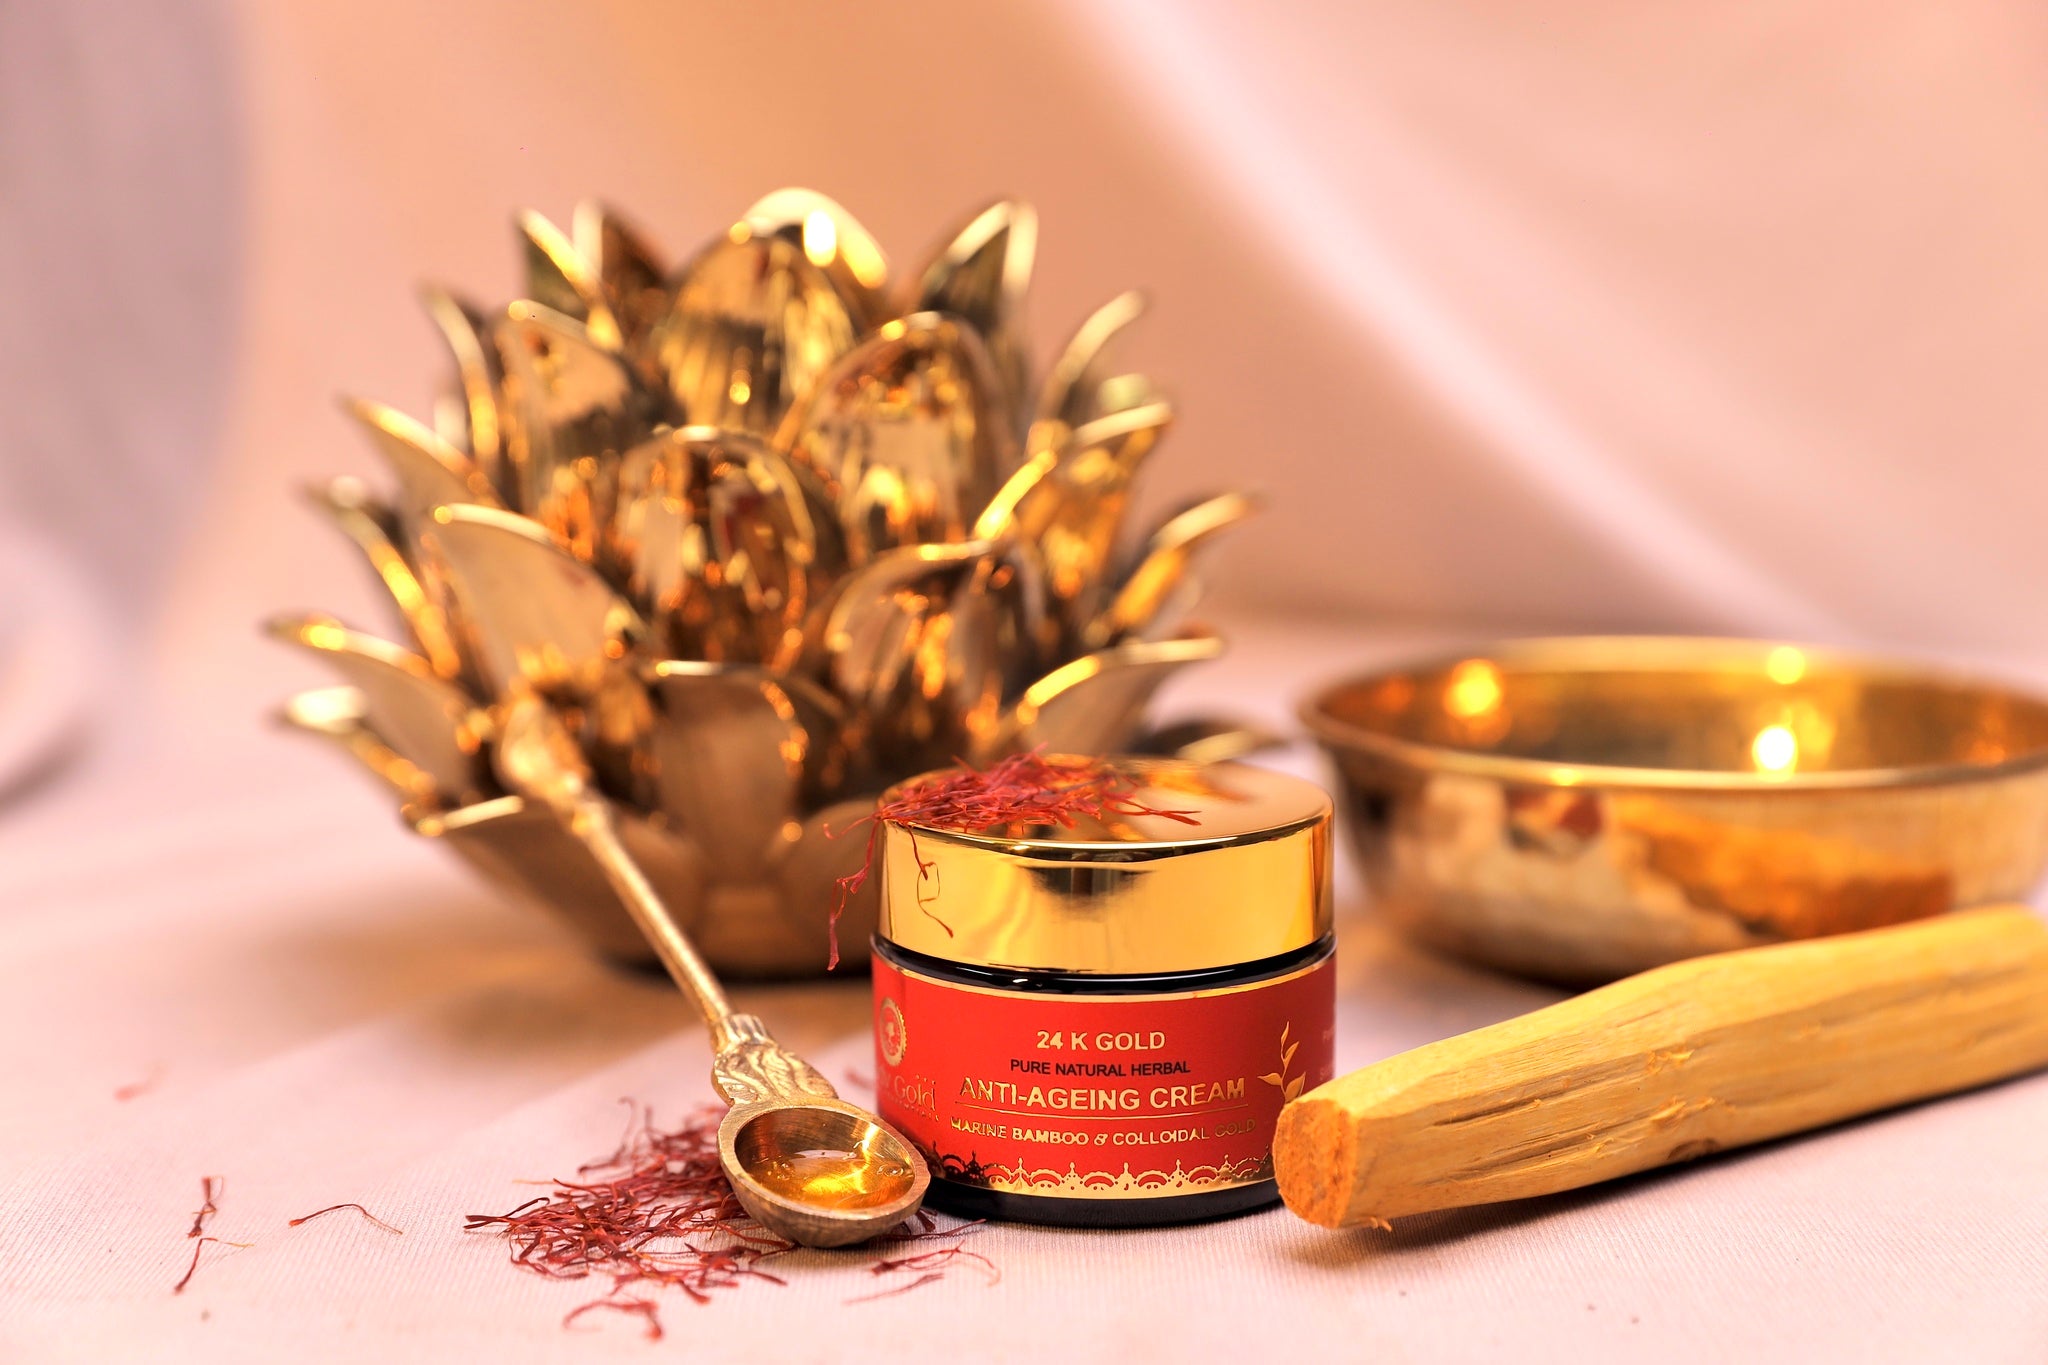 24 K Gold Anti-Aging Creme With Marine Bamboo & Colloidal Gold 50gm